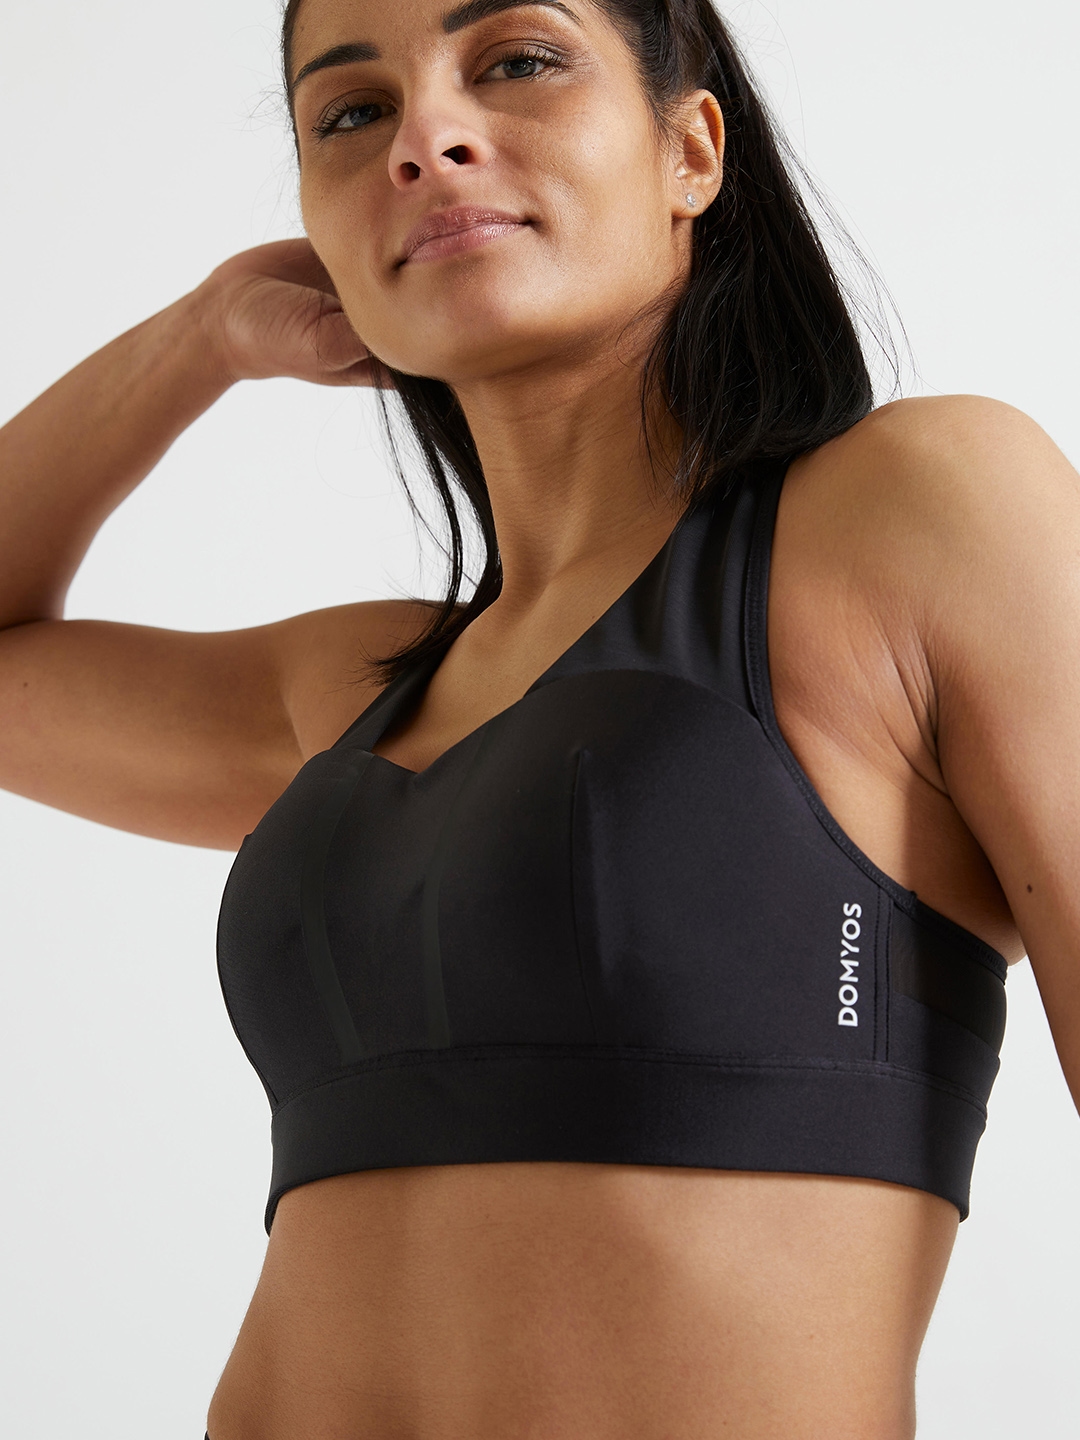 DOMYOS by Decathlon Women Bralette Heavily Padded Bra - Buy DOMYOS by  Decathlon Women Bralette Heavily Padded Bra Online at Best Prices in India